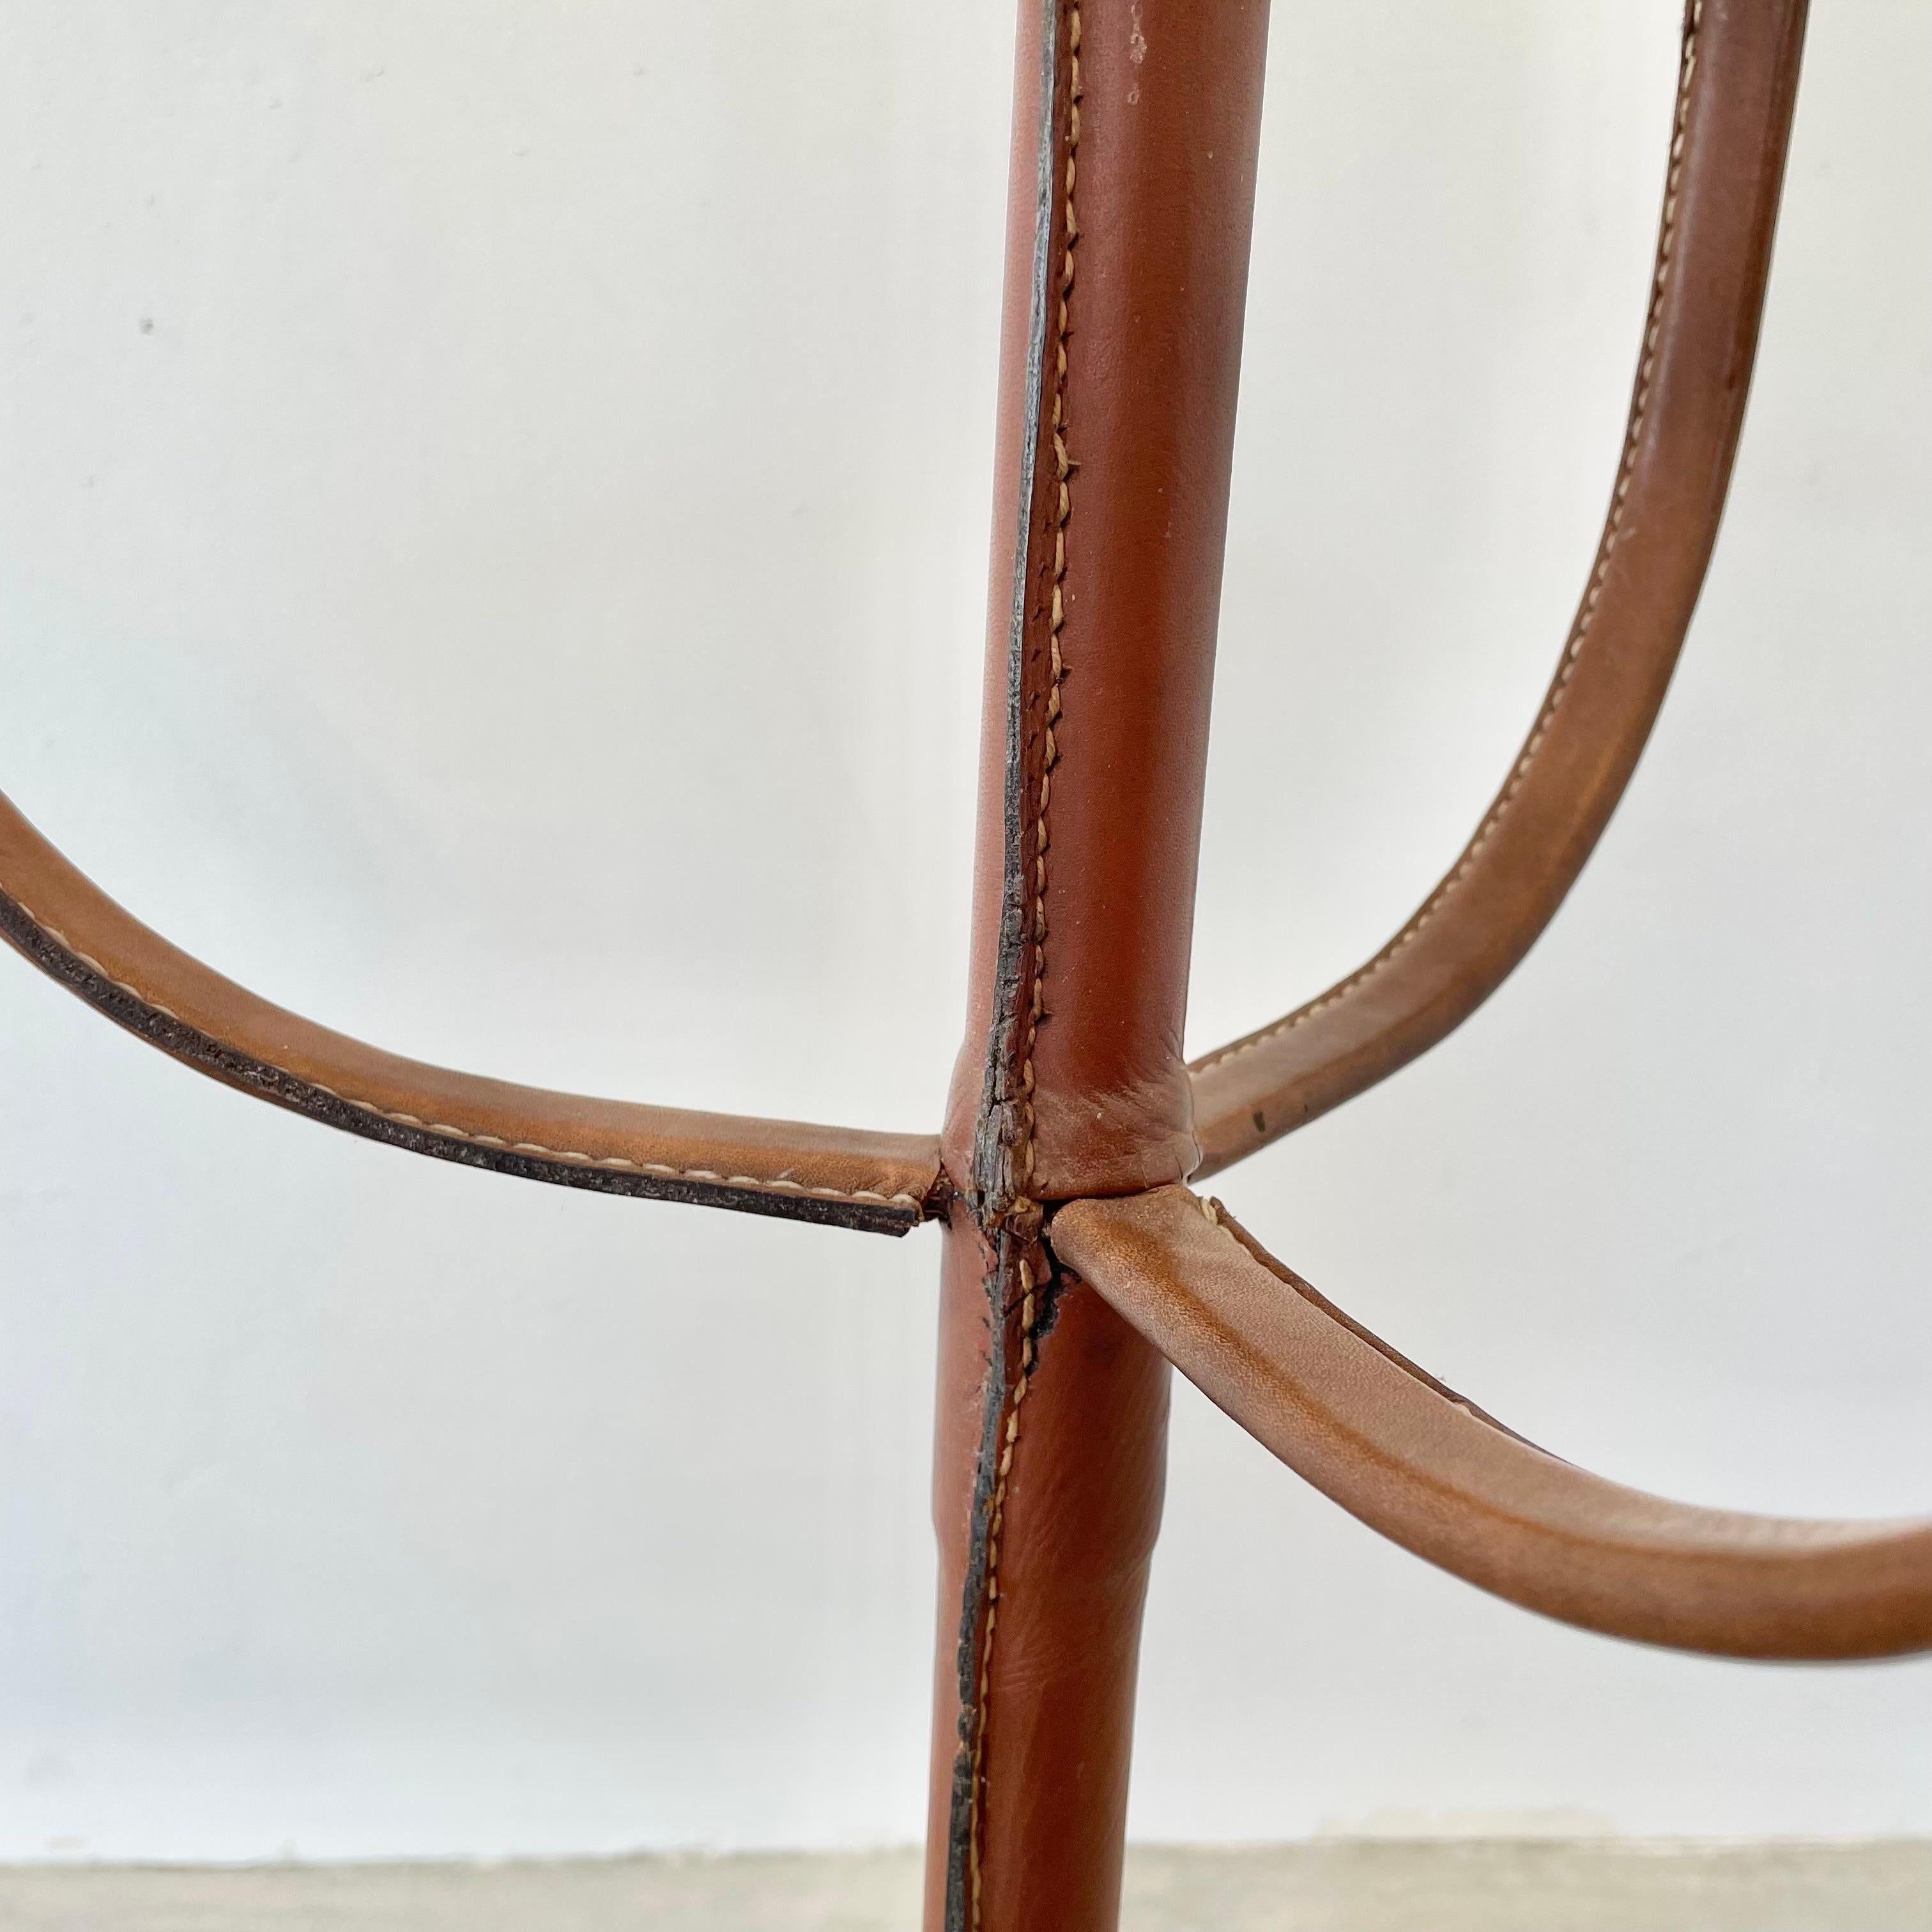 Metal Jacques Adnet Floor Lamp in Saddle Leather, 1950s France For Sale